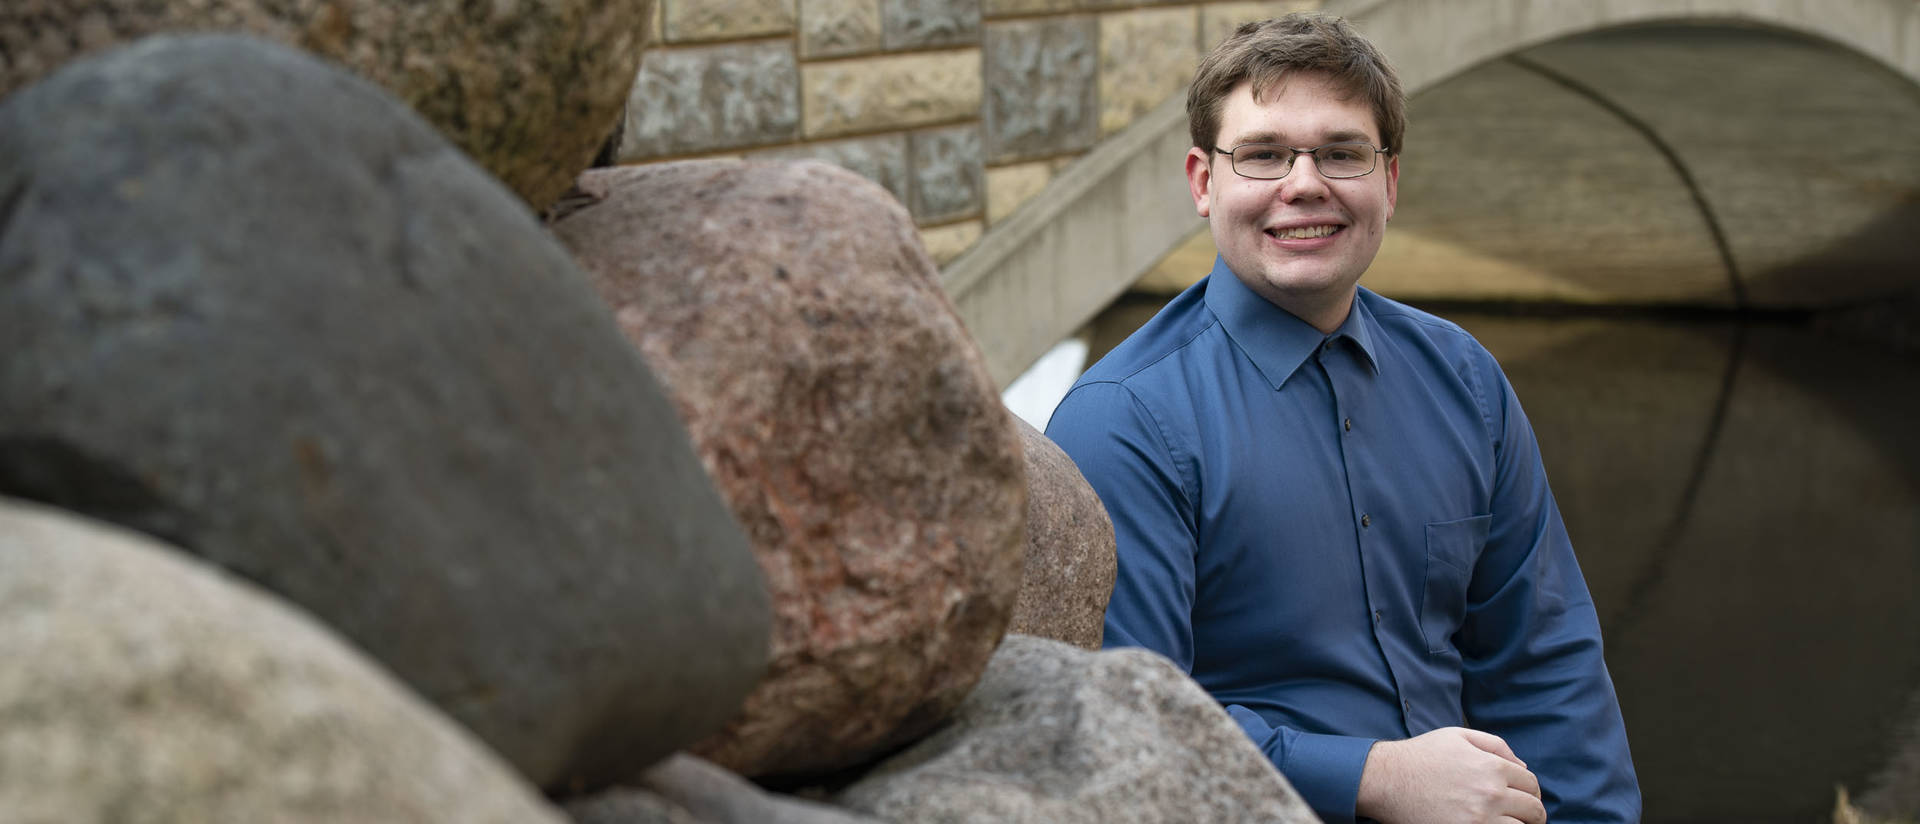 Jacob Erickson has known since elementary school that he wanted to study geology in college. As he prepares to graduate, he says his geology professors at UW-Eau Claire gave him a college experience that exceeded his already high expectations.